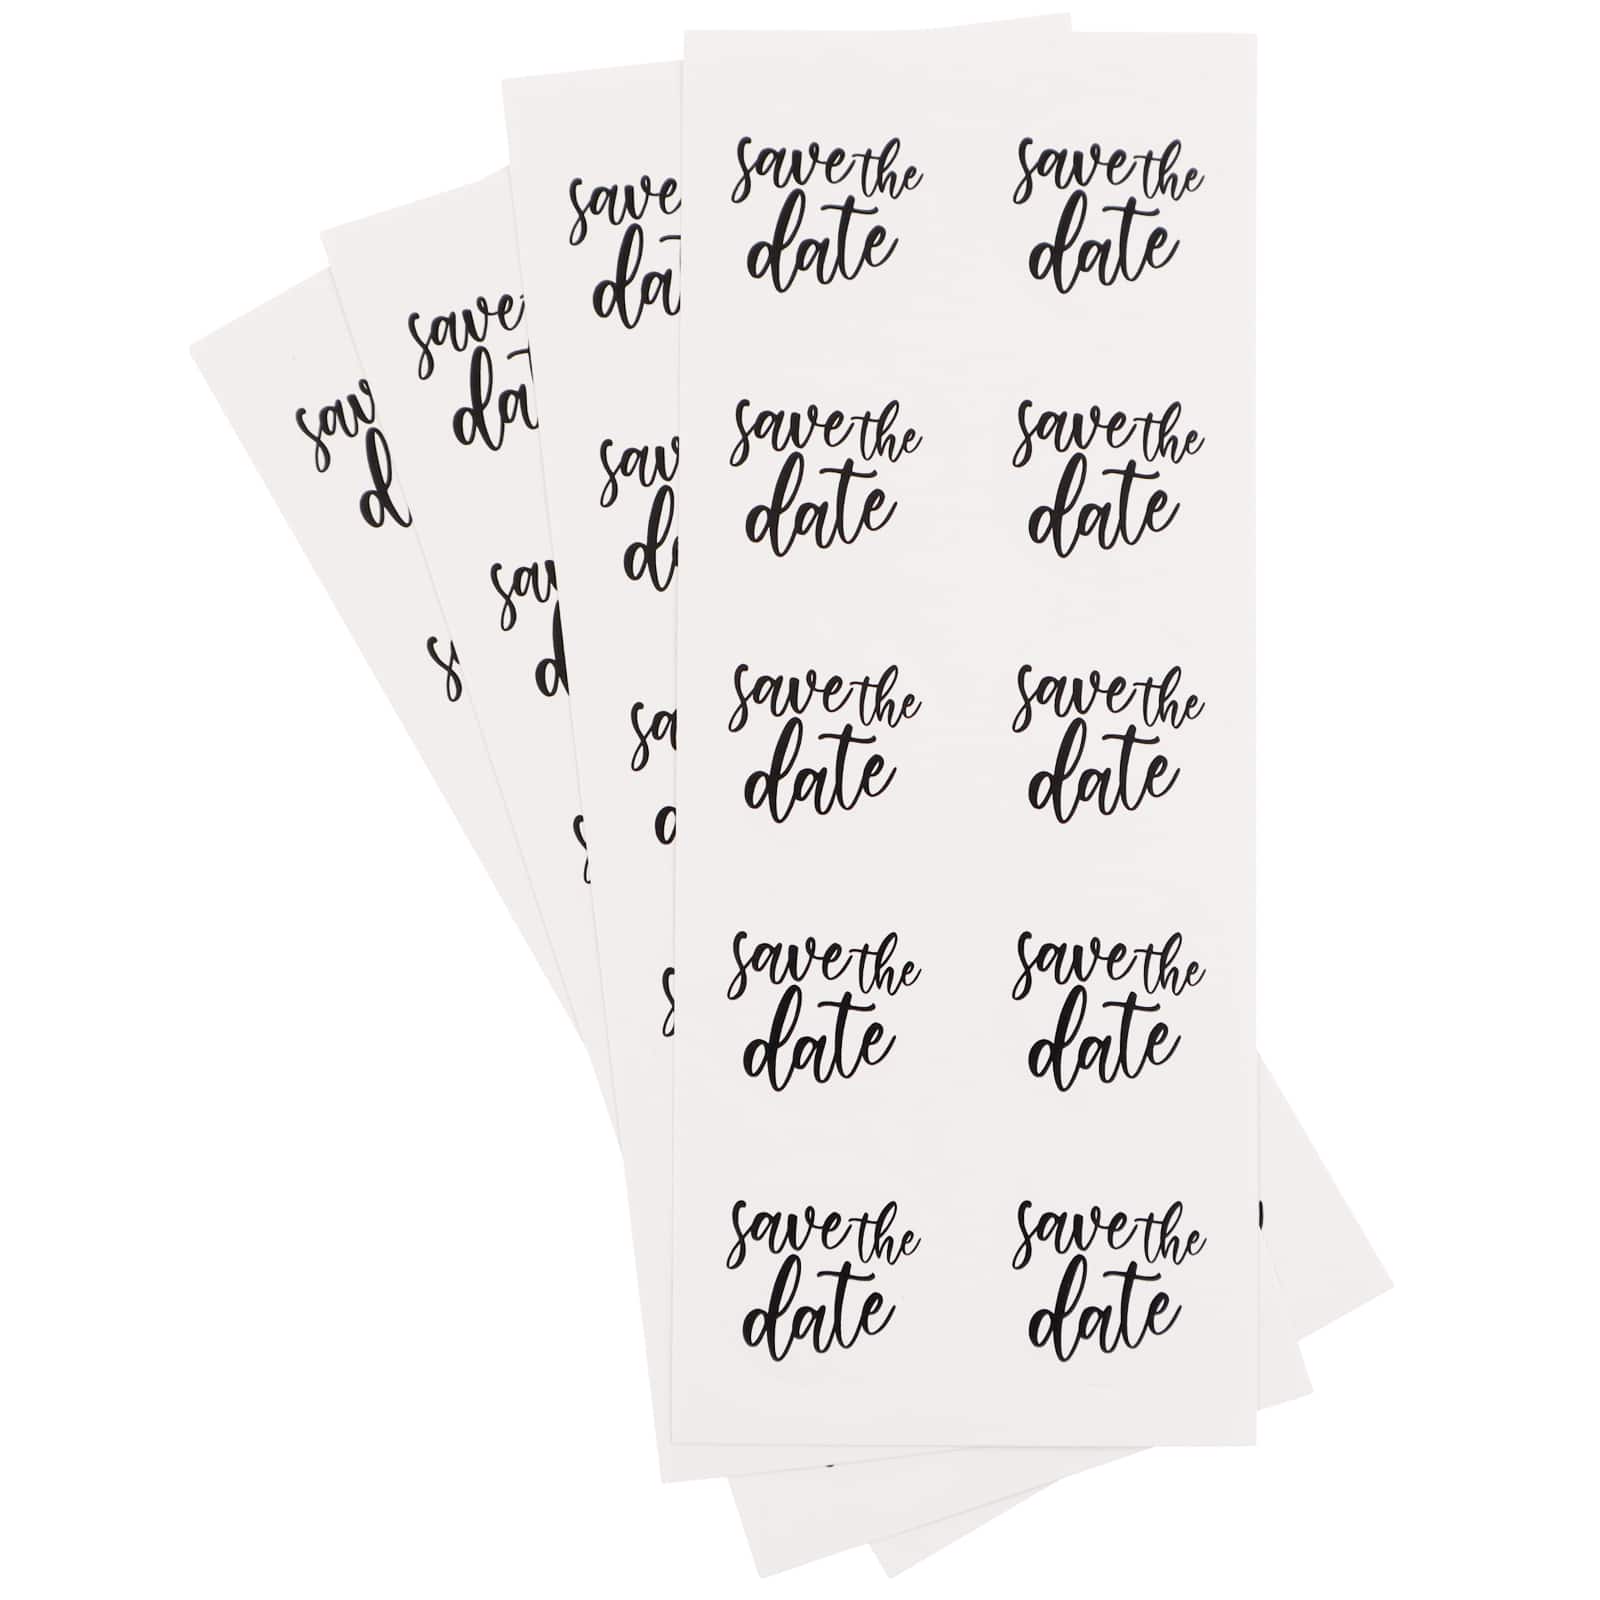 12 Packs: 40 ct. (480 total) Save the Date Envelope Seals by Recollections&#x2122;